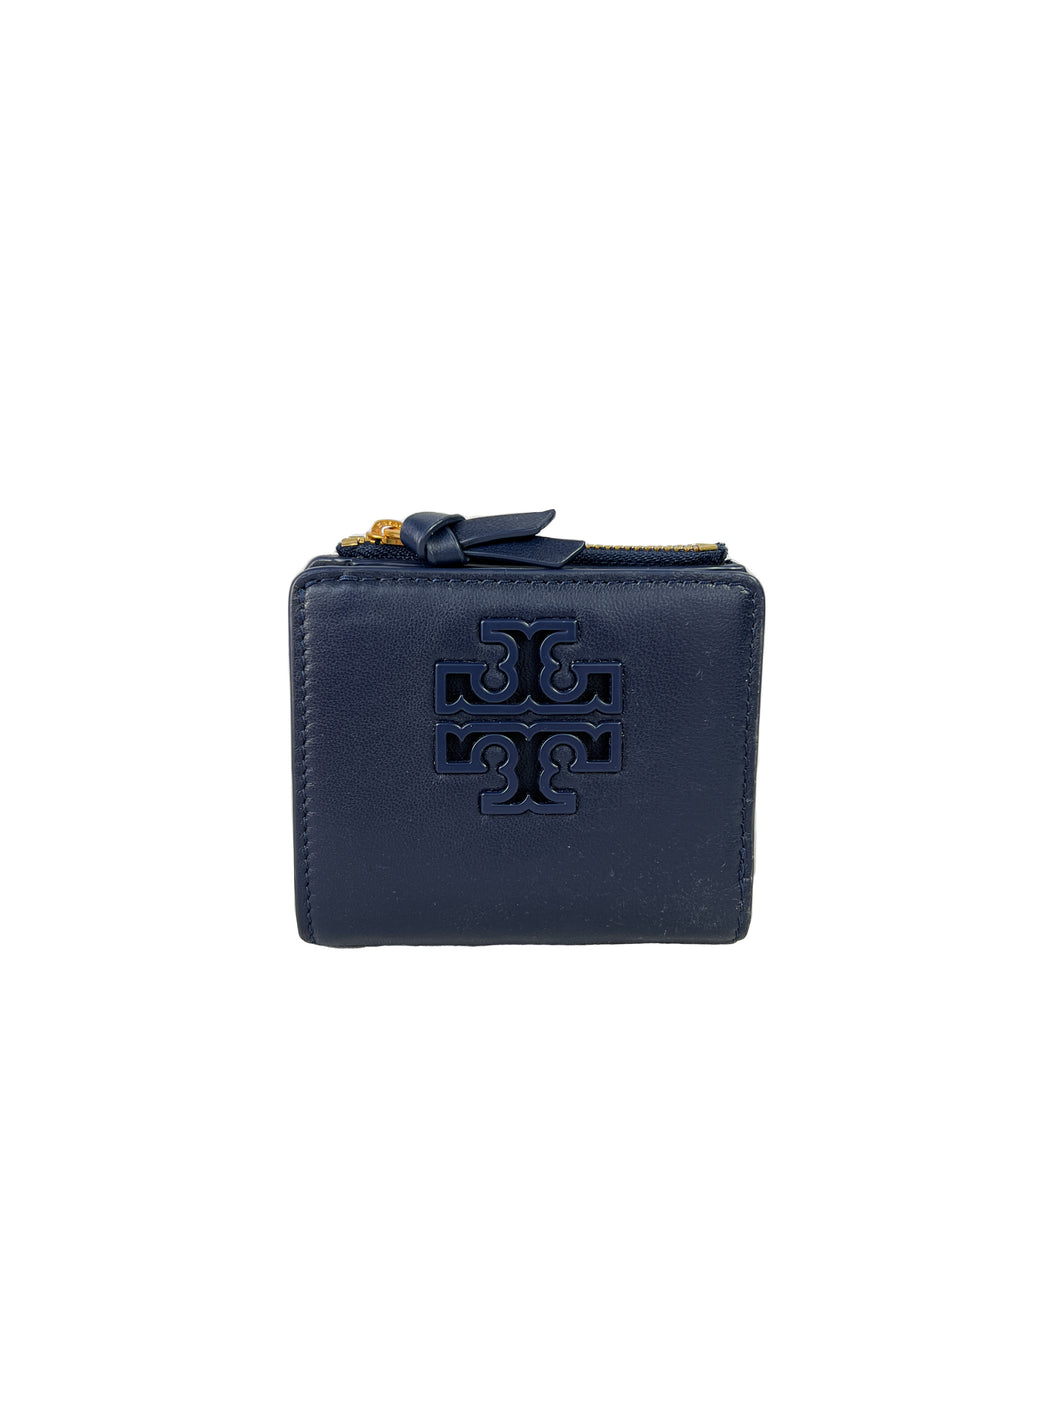 Tory Burch navy leather small wallet